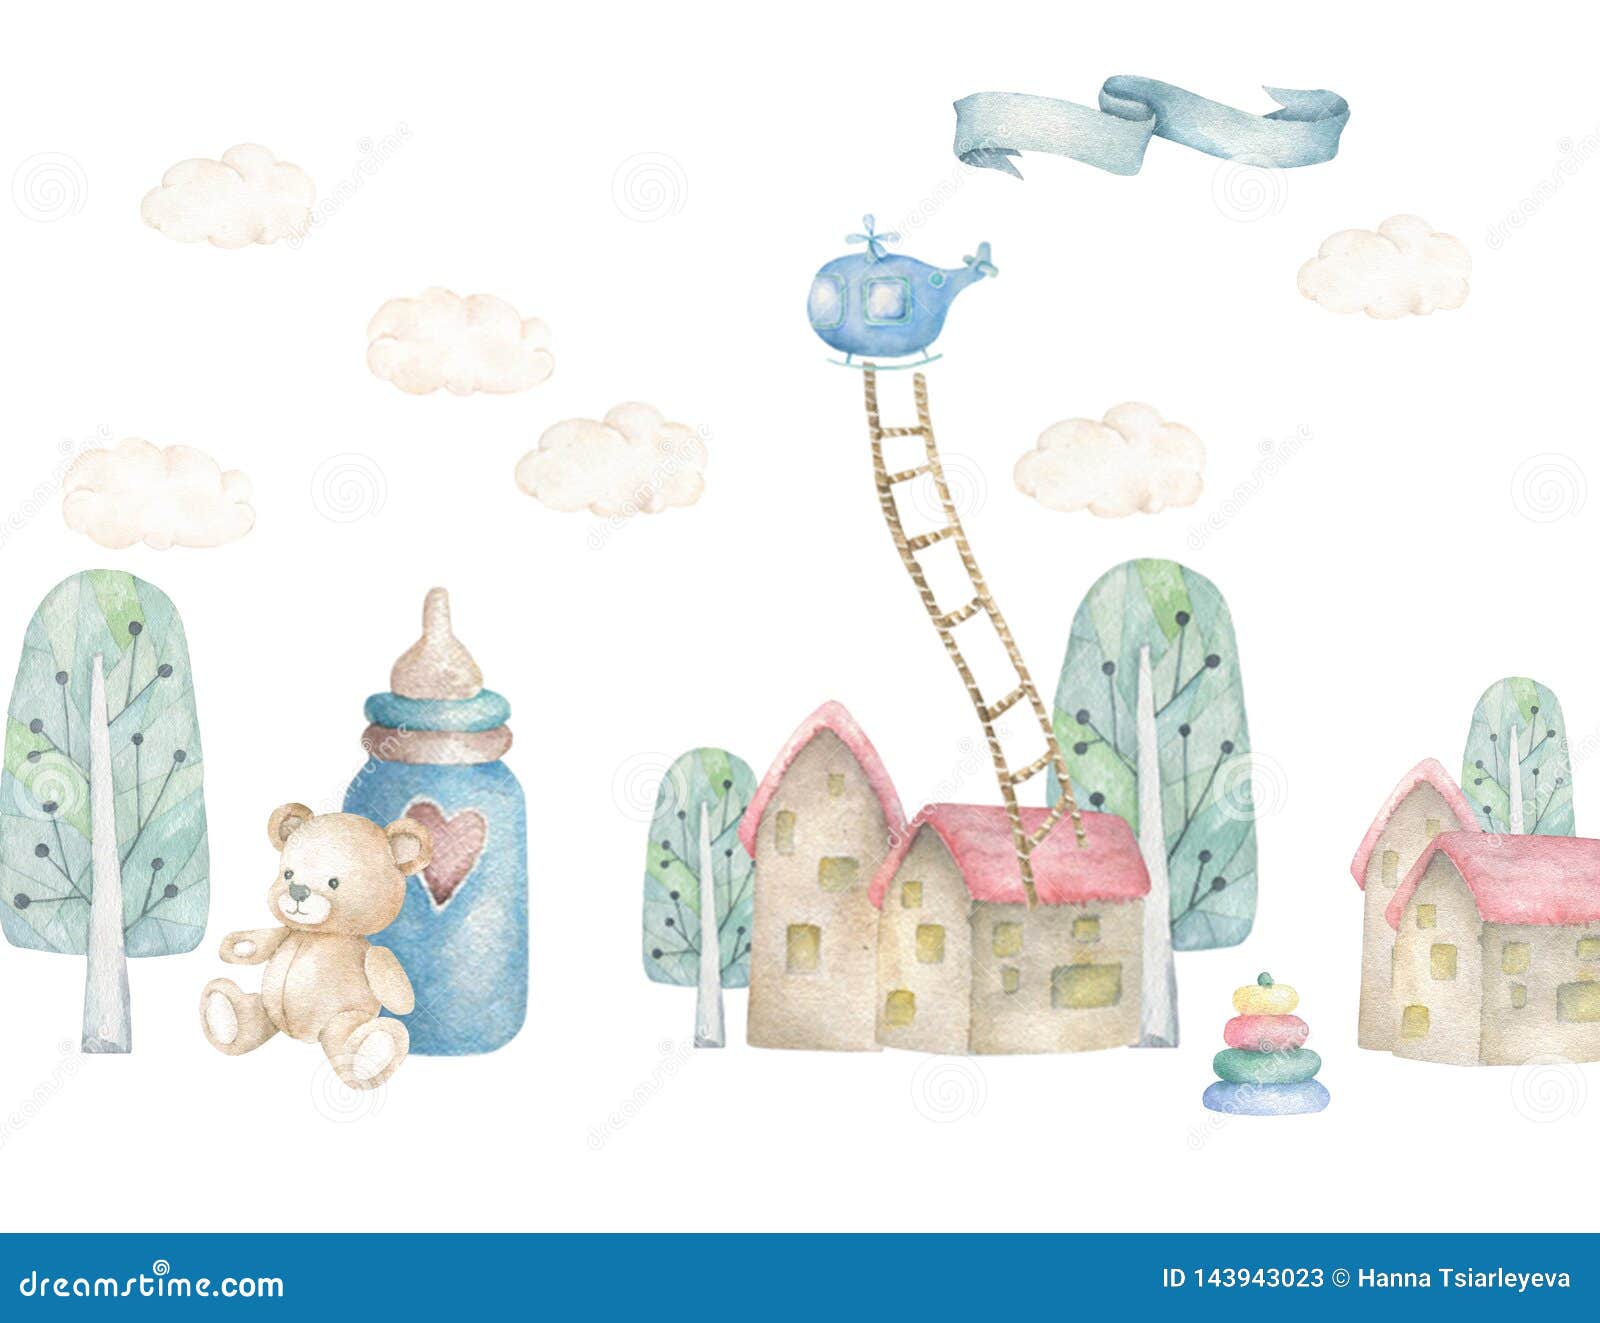 Baby Dream Land With Treen And Little House Helicopter Nad Strairs Children Illustration Watercolor Cute Town White Background Stock Illustration Illustration Of Camp Lands 143943023